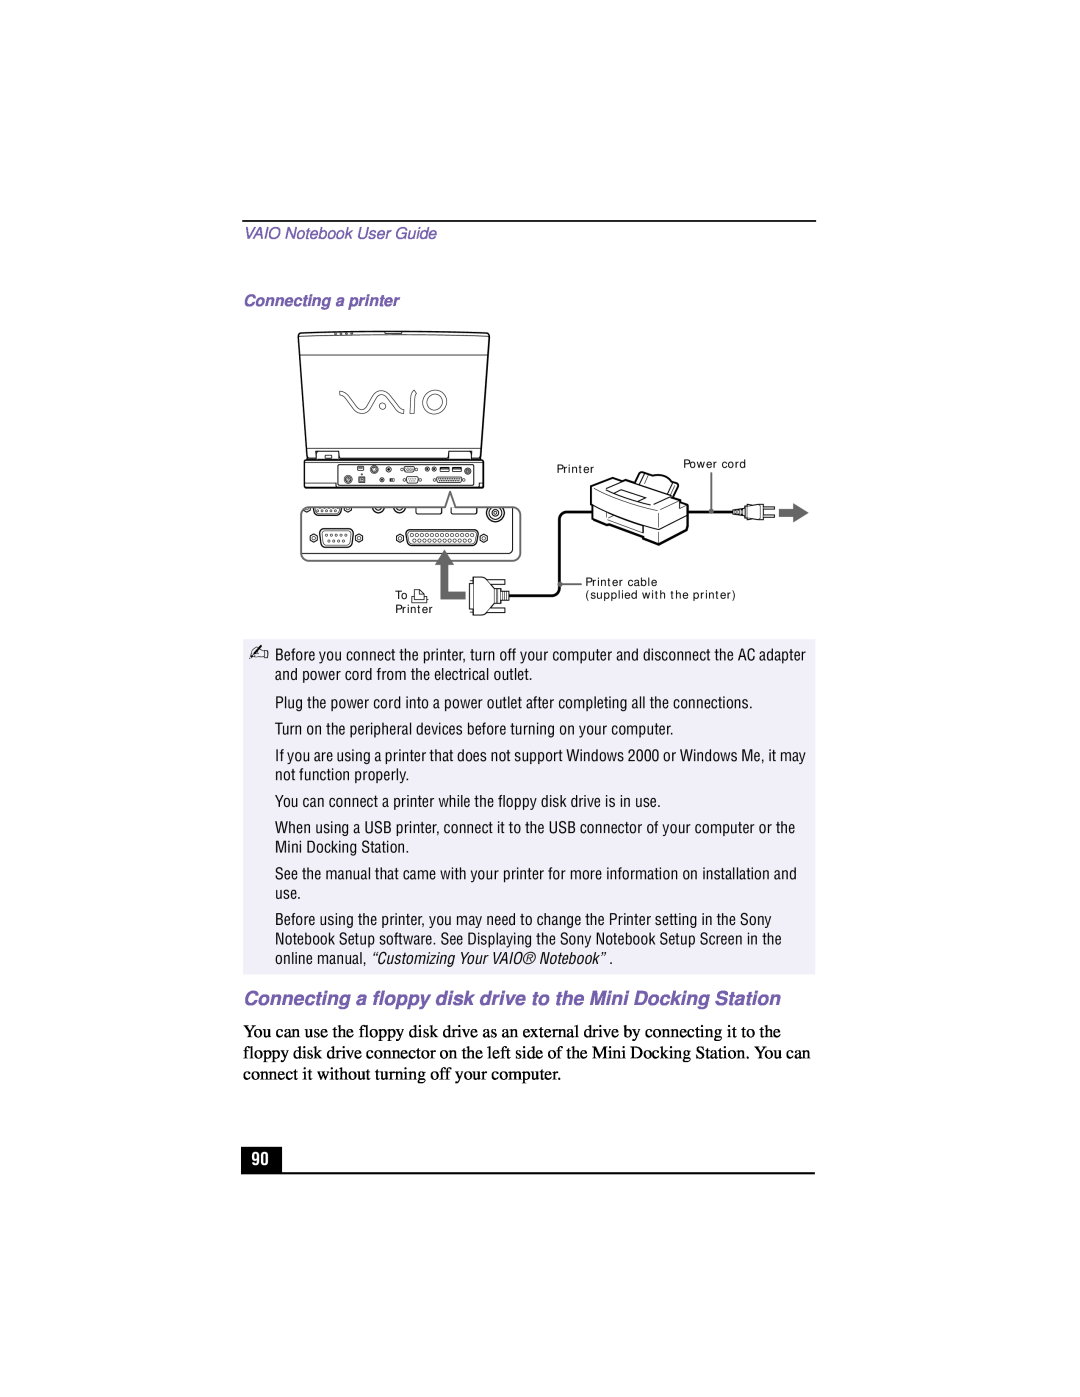 Sony PCG-XG500K Connecting a floppy disk drive to the Mini Docking Station, VAIO Notebook User Guide, Connecting a printer 